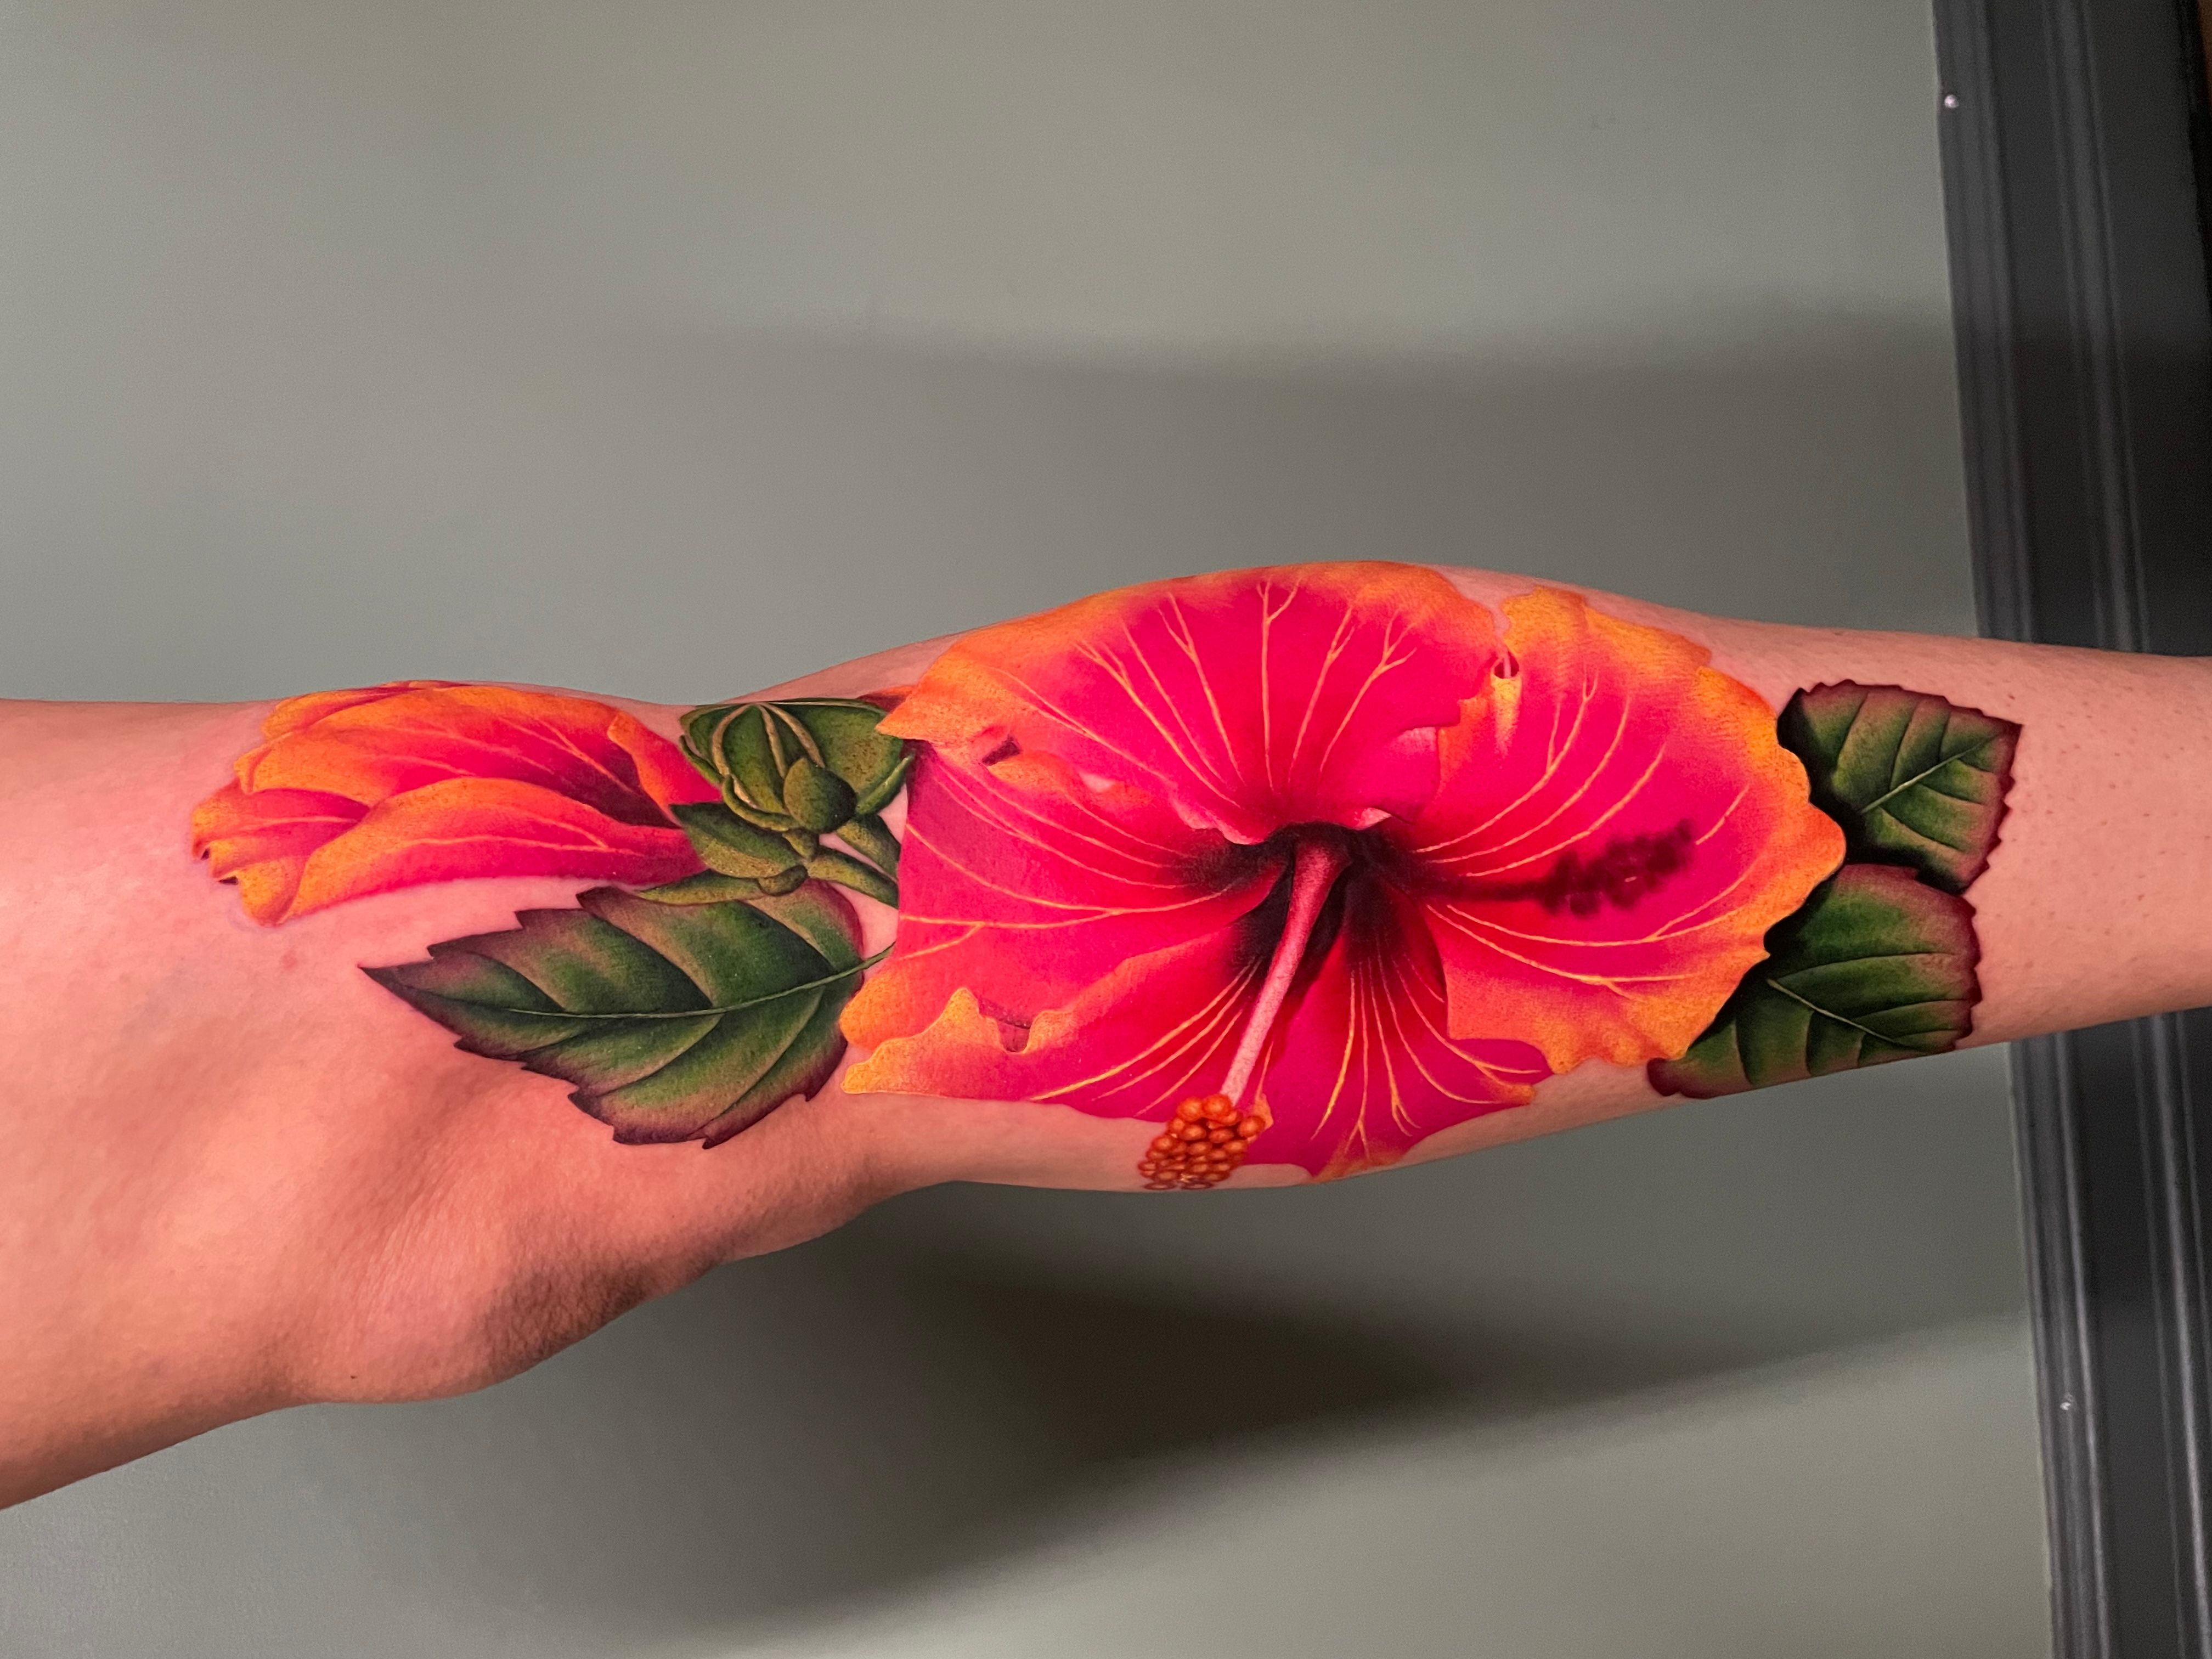 Hibiscus, done by Seipha at La Ruche in the 17th arr. of Paris. : r/tattoos